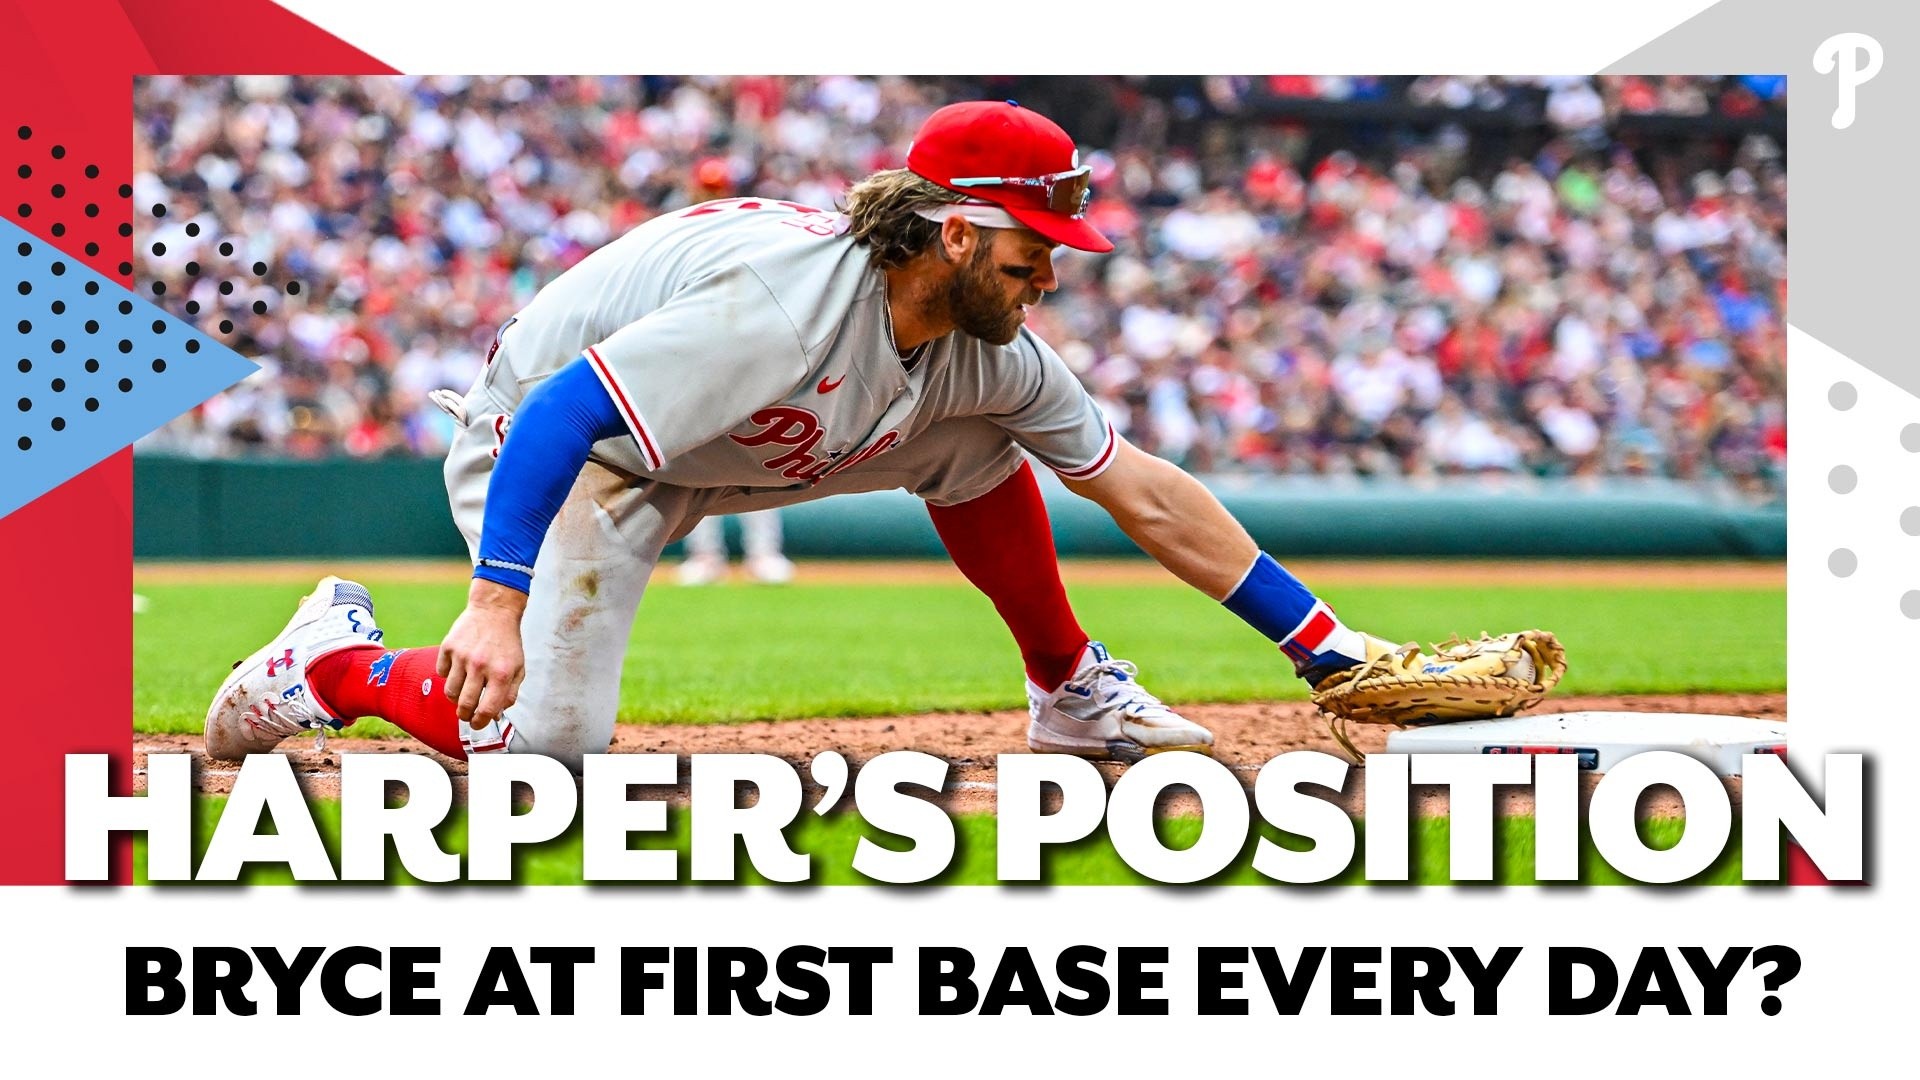 When will Bryce Harper play first base and what do fans need to